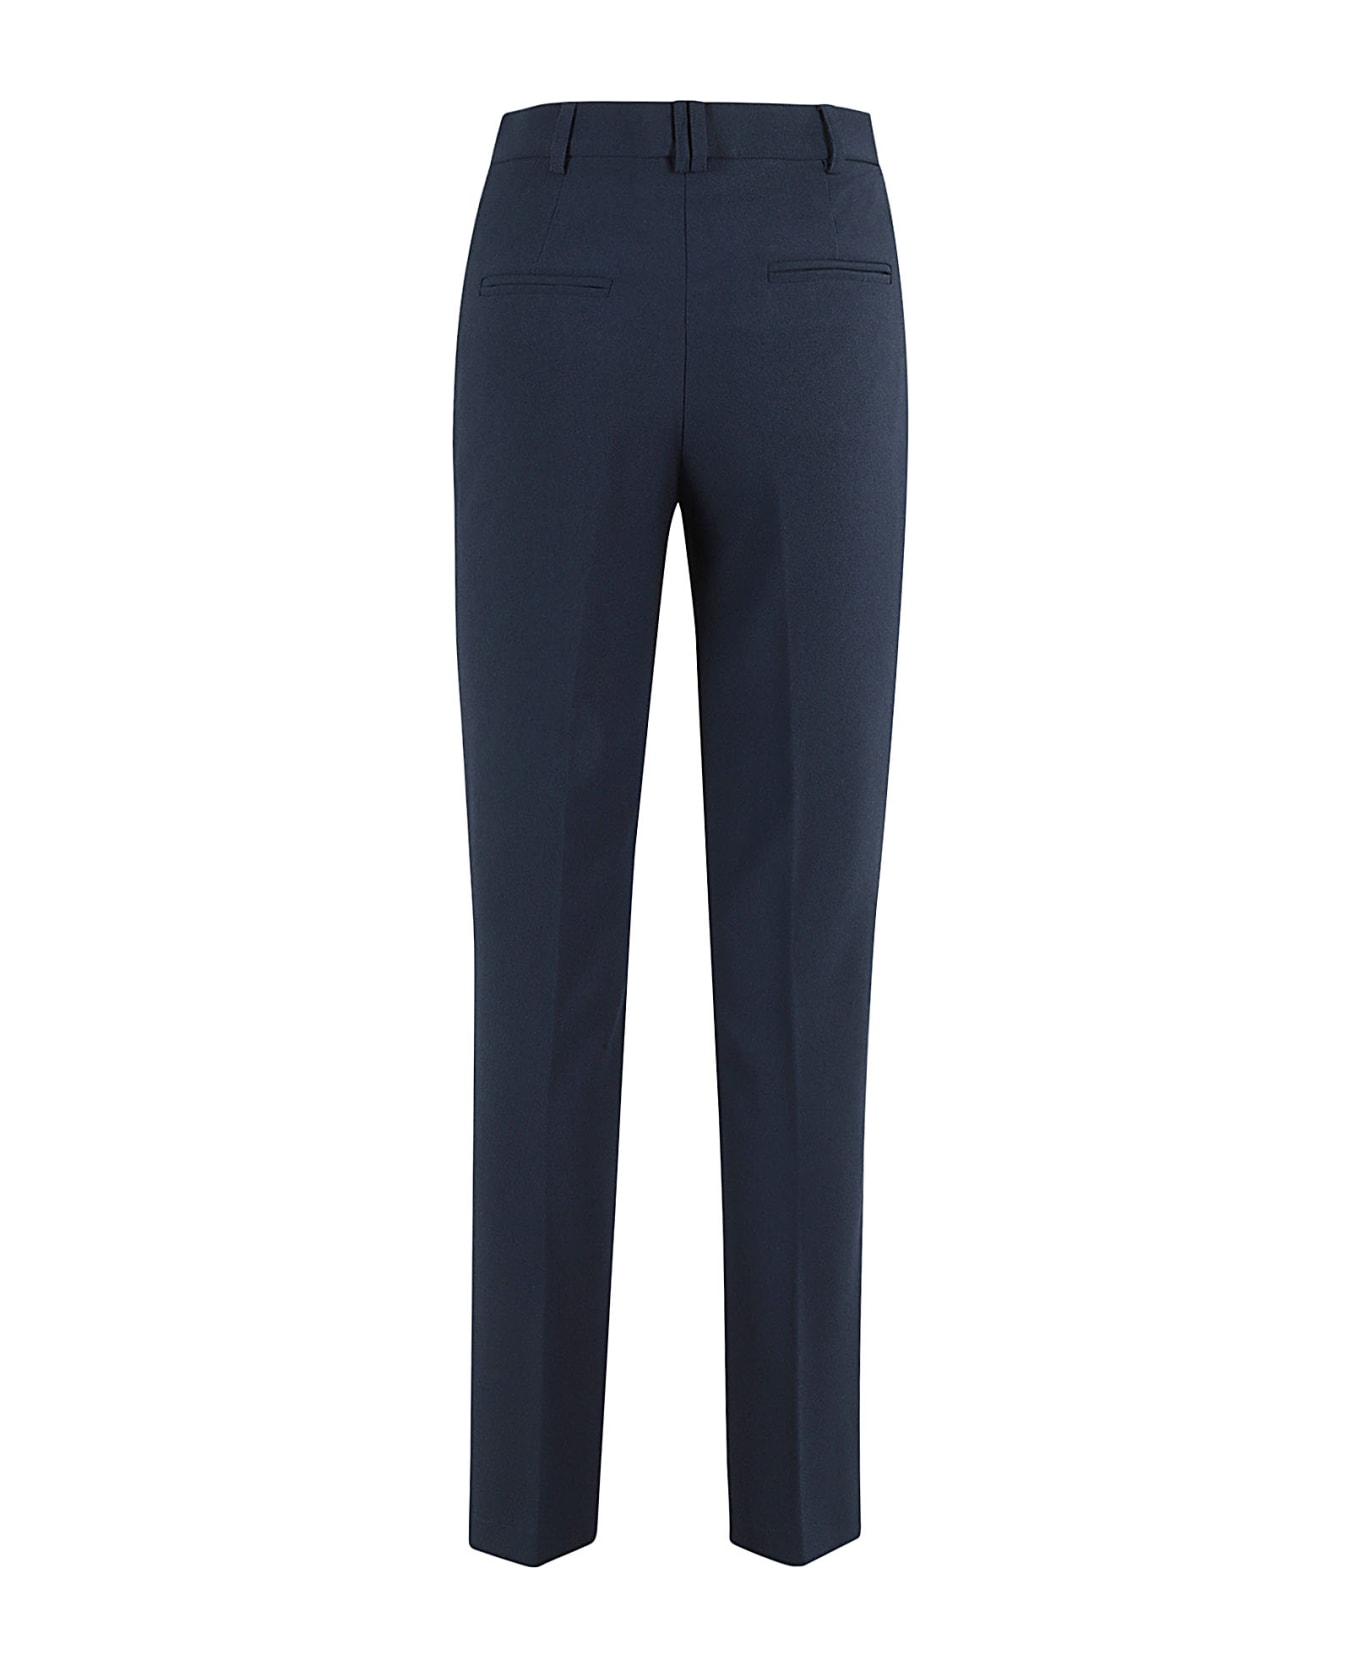 Hebe Studio The Classic Smoking Pant Cady - Navy ボトムス